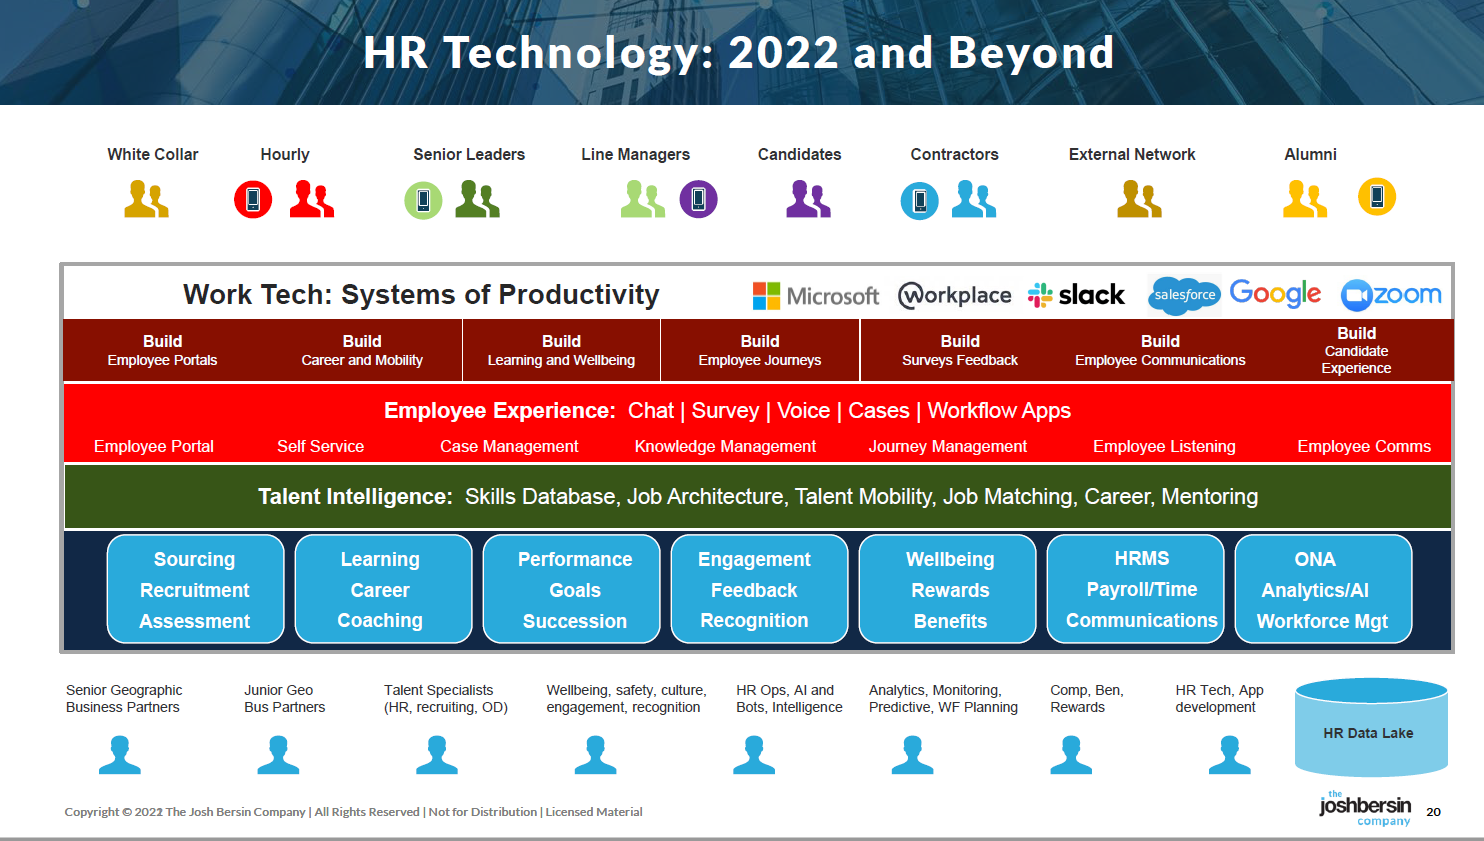 Josh Bersin provided this view of HR technology in 2022 and beyond in the form of a framework that could also serve as a foundational tech stack. Talent Intelligence comprises the Skills Database, Job Architecture, Talent Mobility, Job Matching and  Career and Mentoring modules.